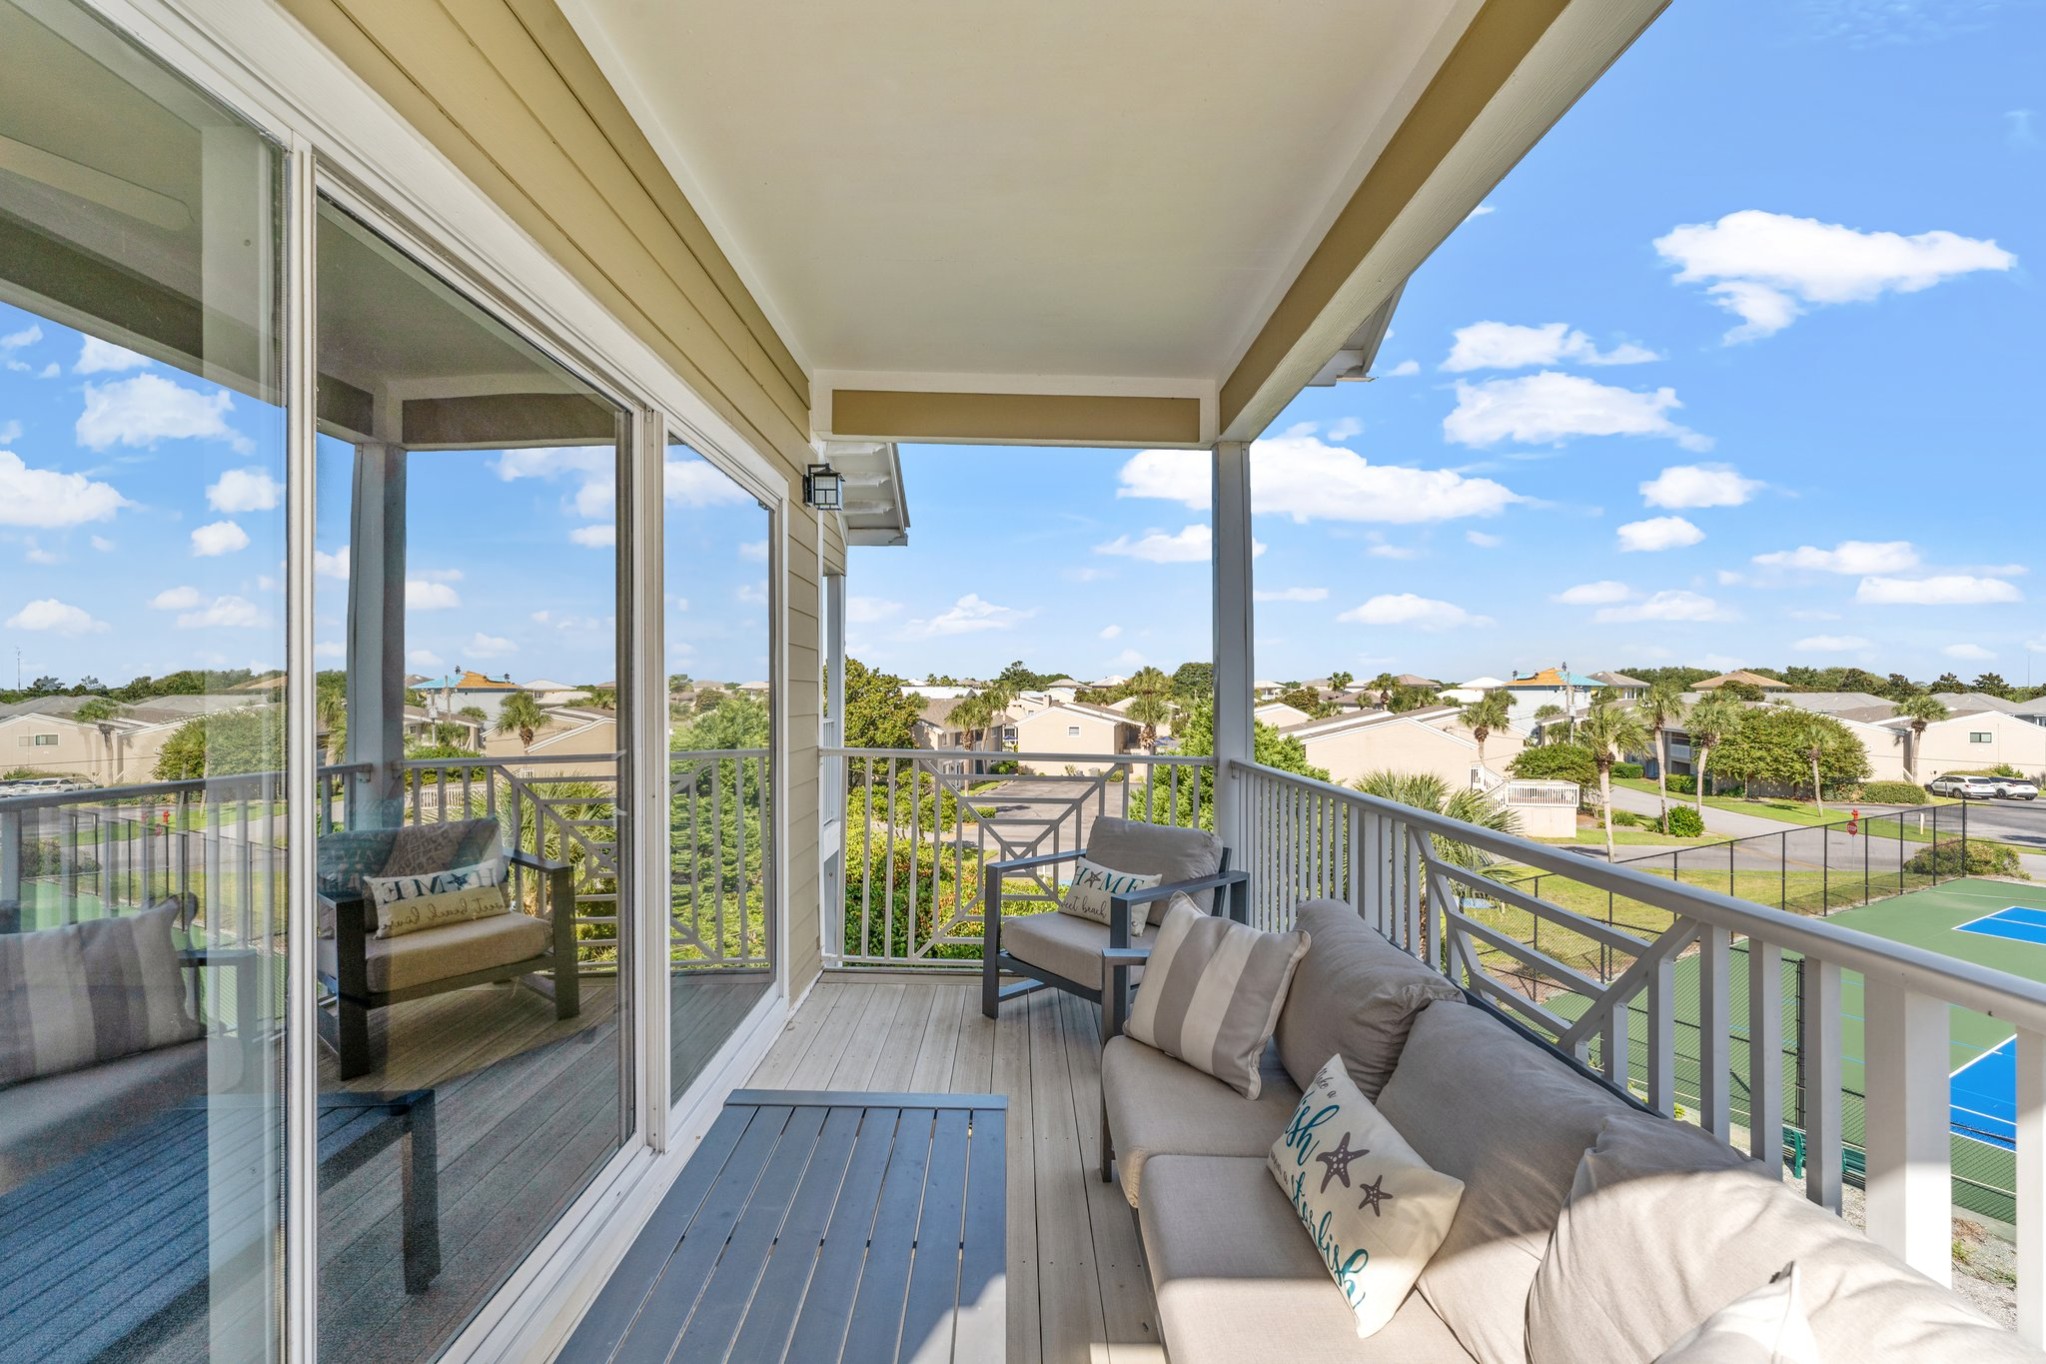 Master bedroom walk out private balcony with cozy patio furniture to enjoy stunning sunsets